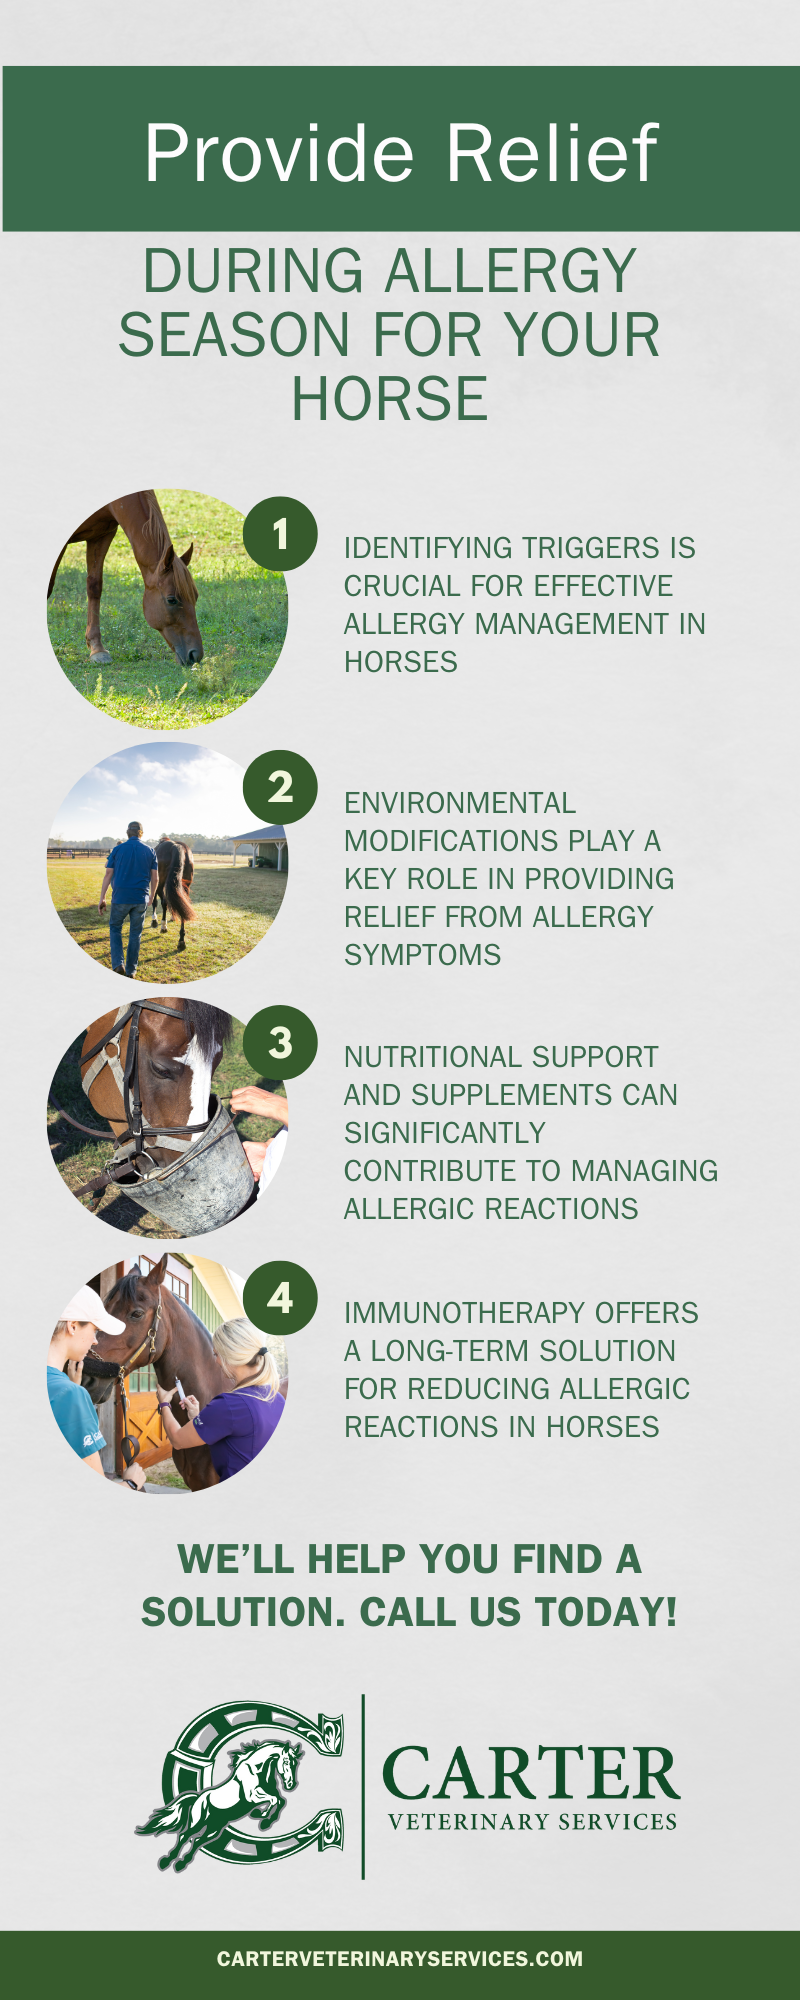 M28841 - Infographic - How To Provide Relief During Allergy Season For Your Horse .png